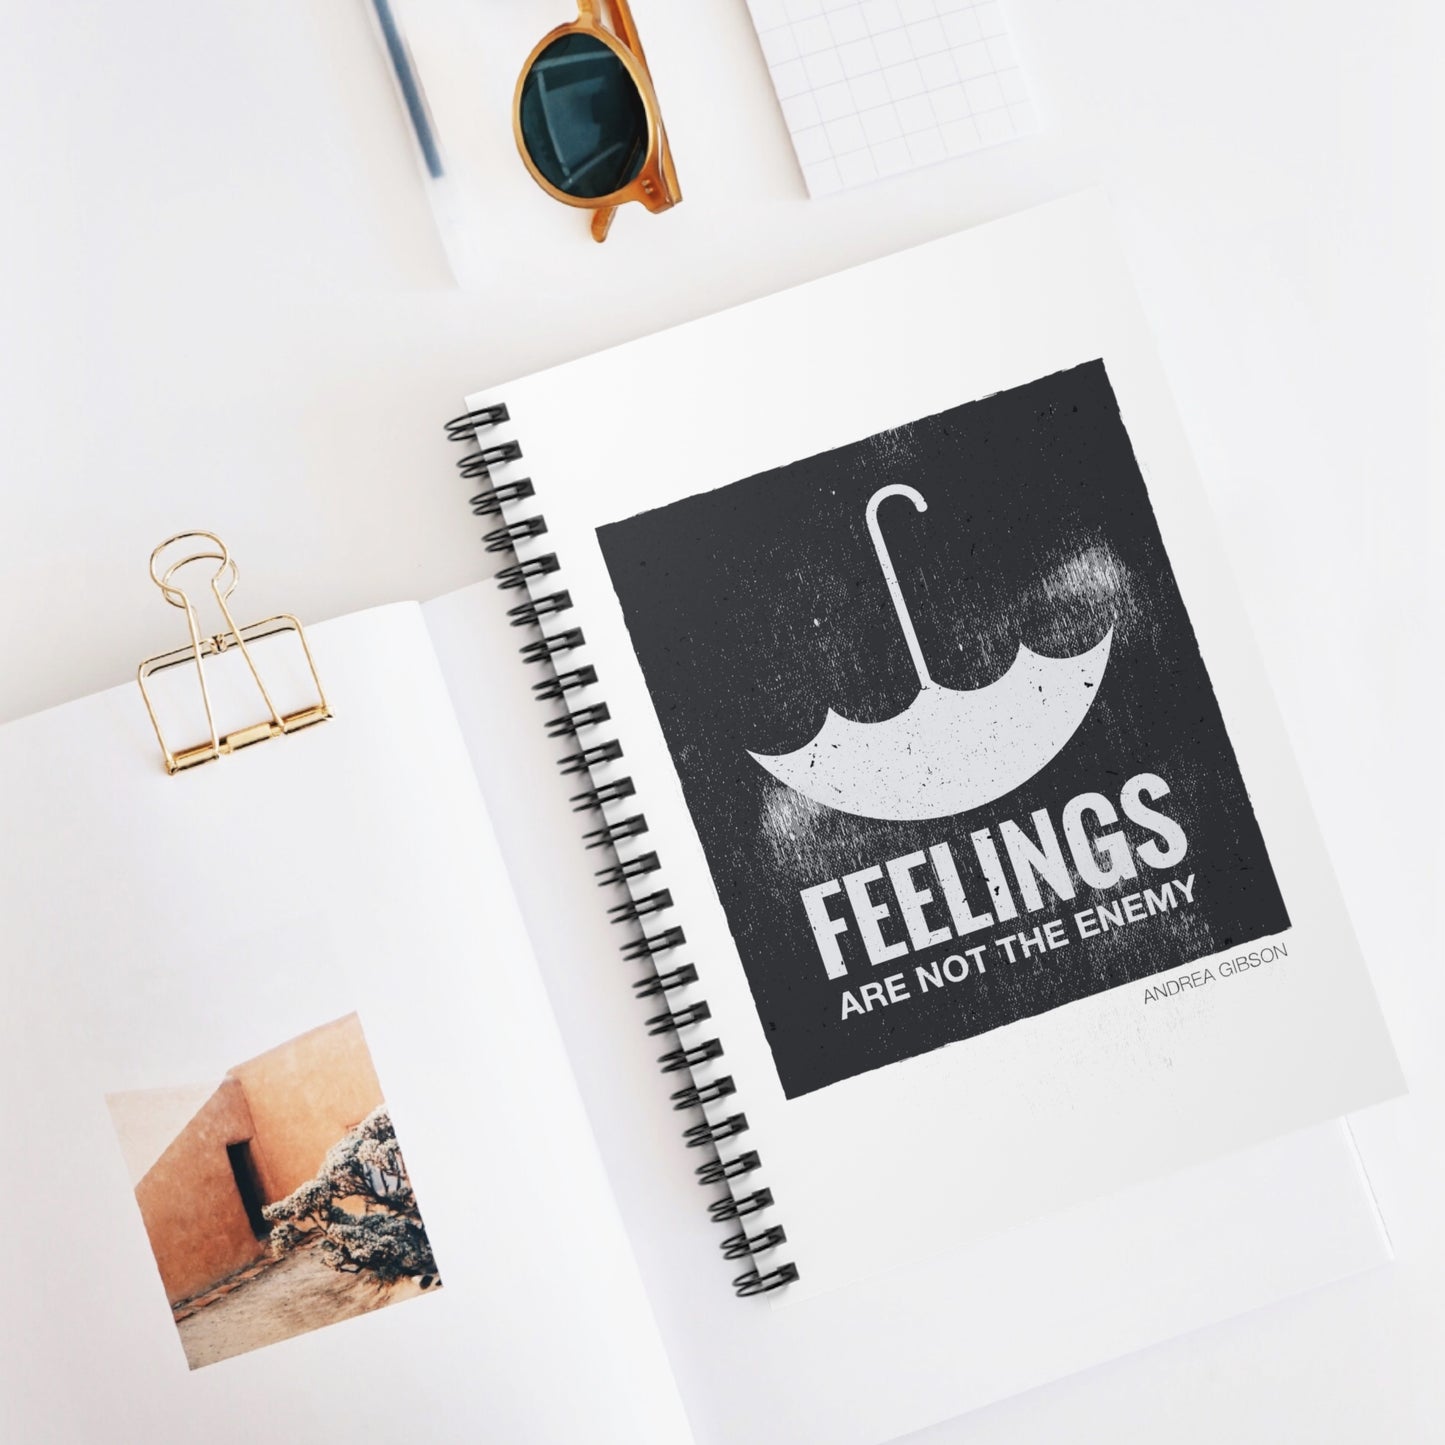 Feelings Are Not The Enemy Spiral Notebook